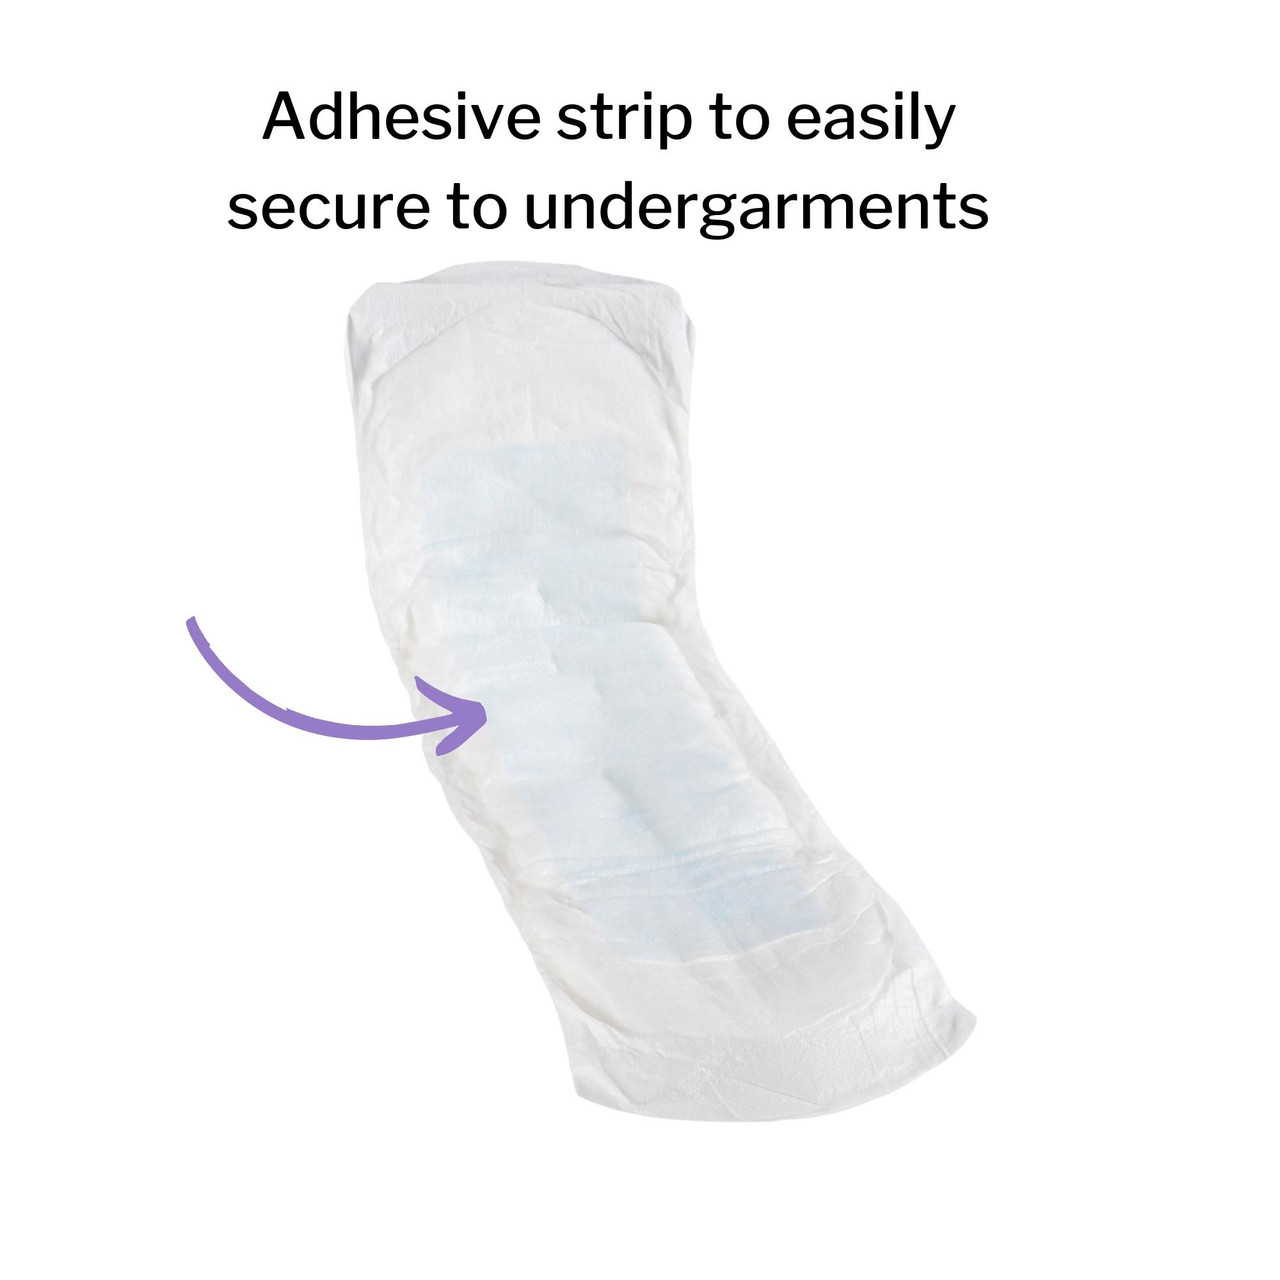 McKesson Ultra Bladder Control Pads, Heavy Absorbency - Unisex Adult, One Size Fits Most, Disposable, 14 1/2 in L